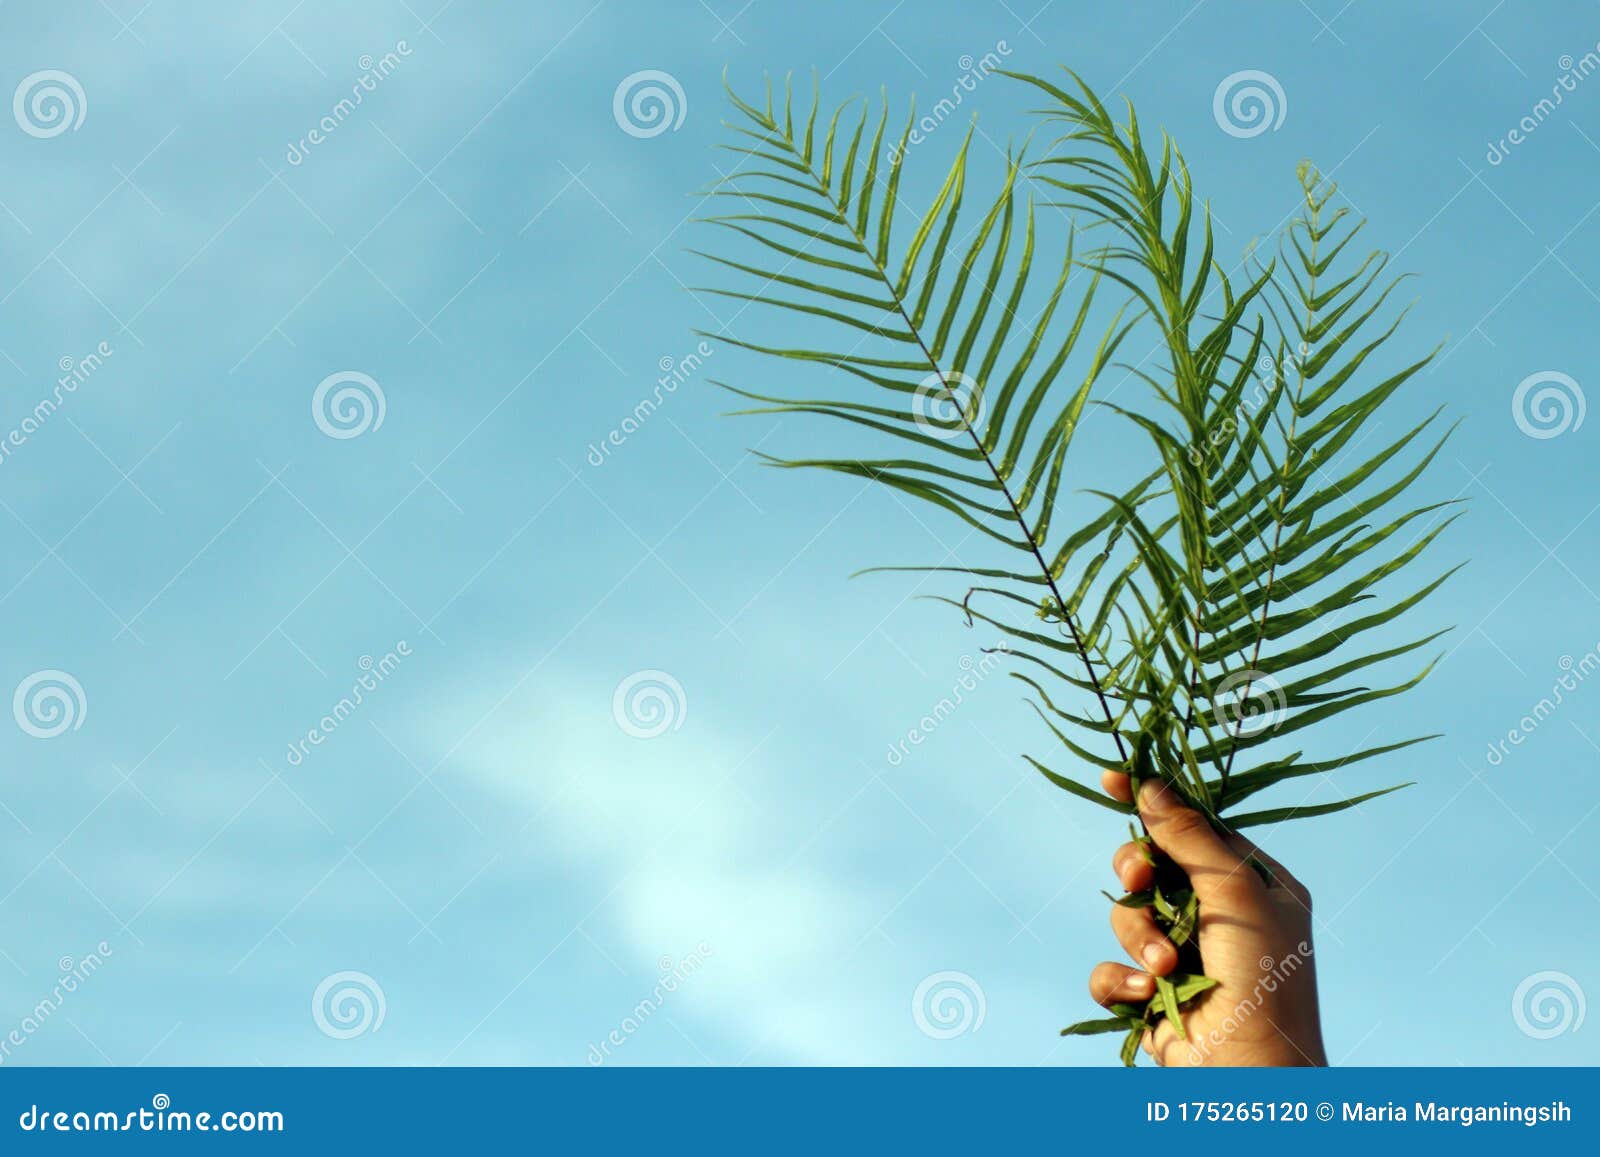 palm leaf in hand against bright blue sky background.